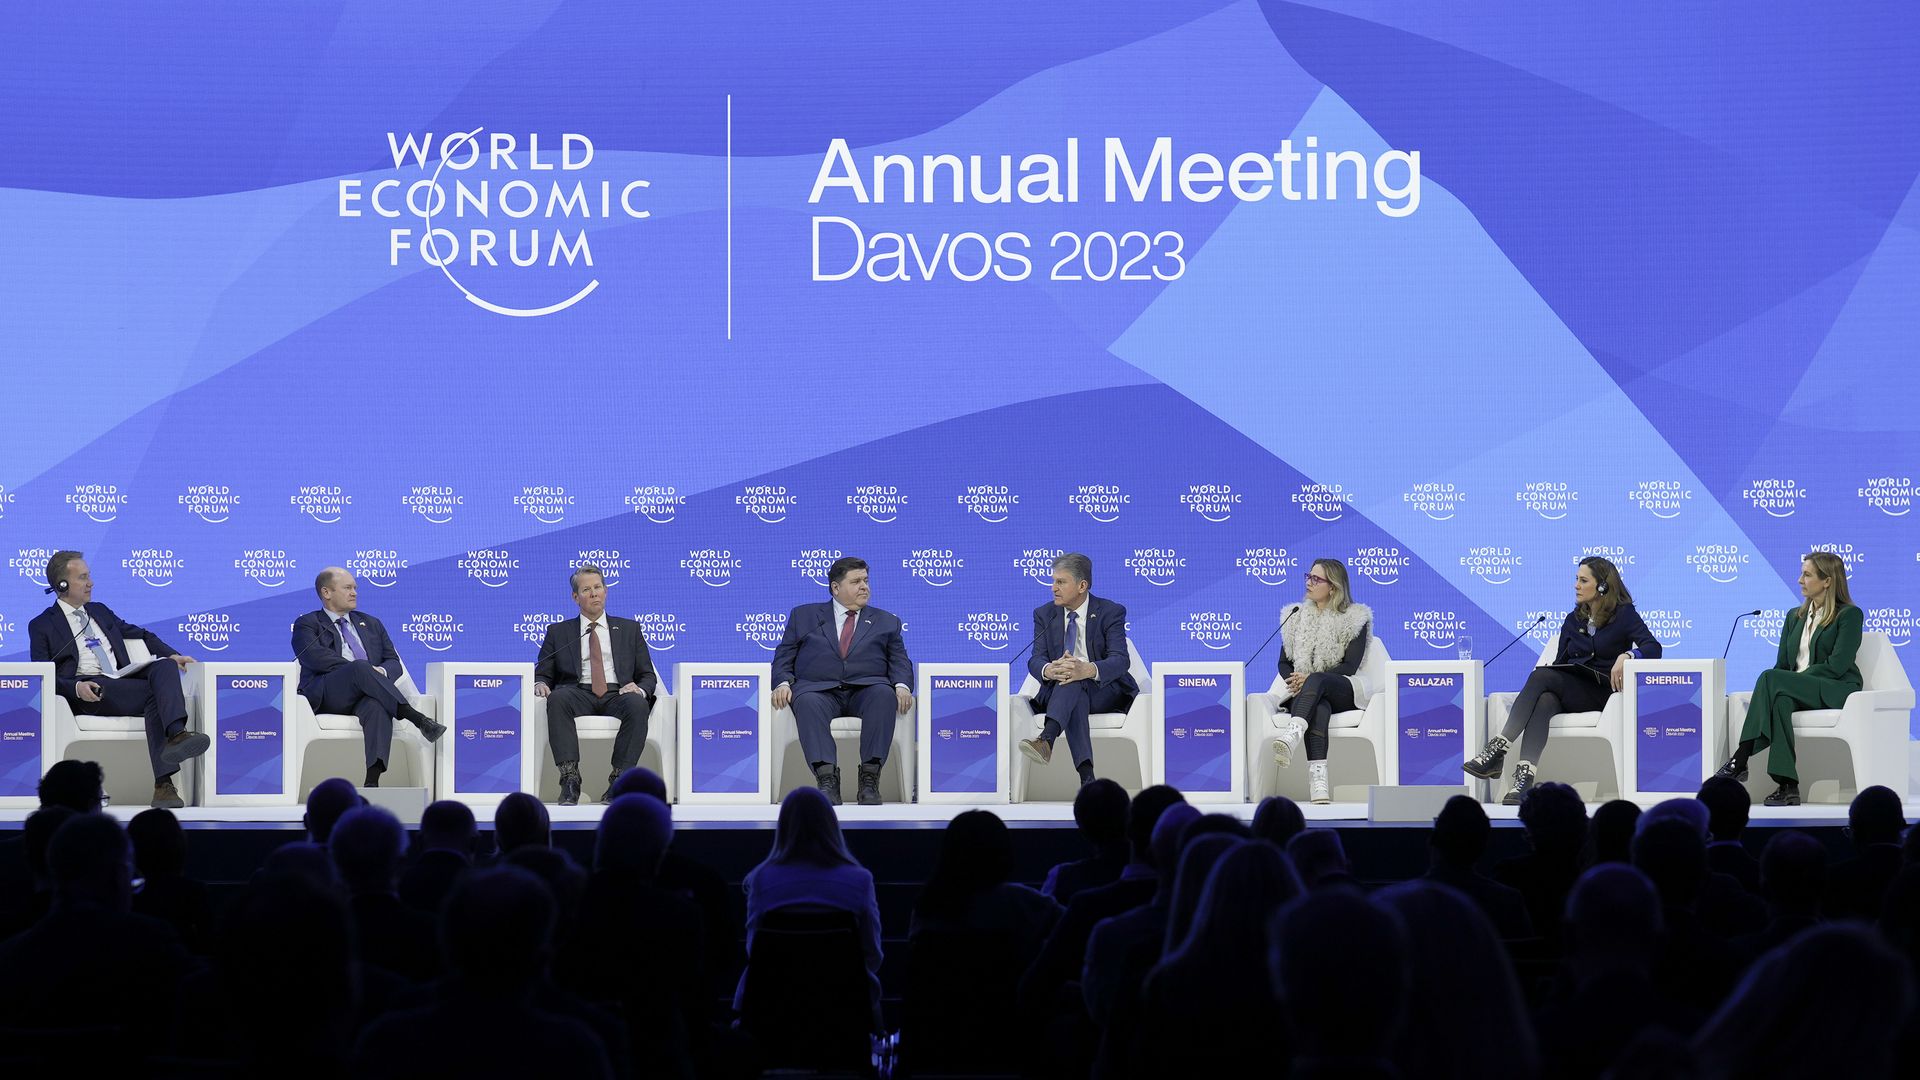 Panel discussion at Davos